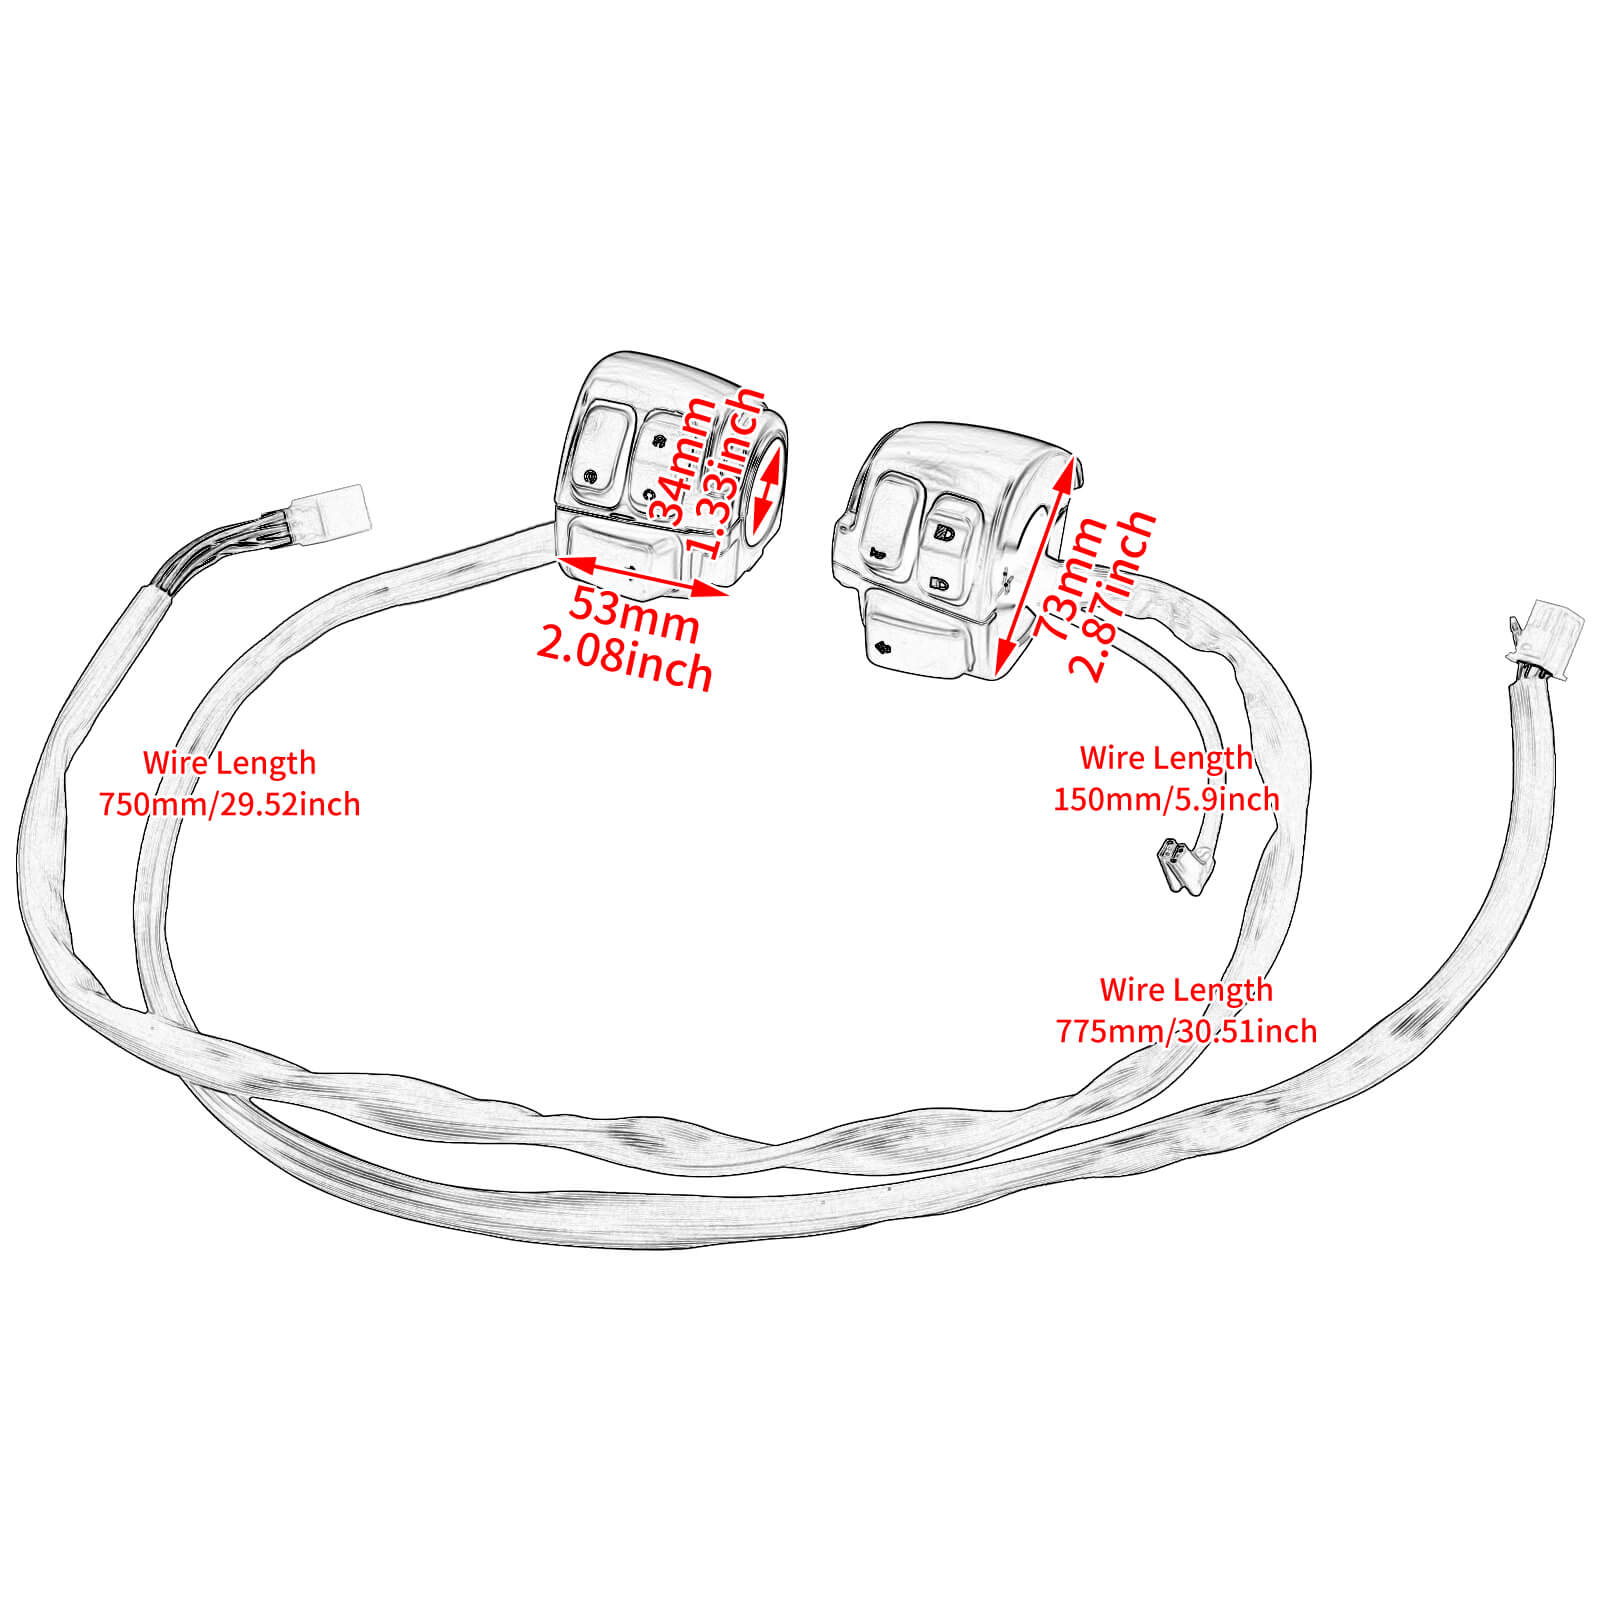 TH009401-harley-sportster-handlebar-control-switches-size